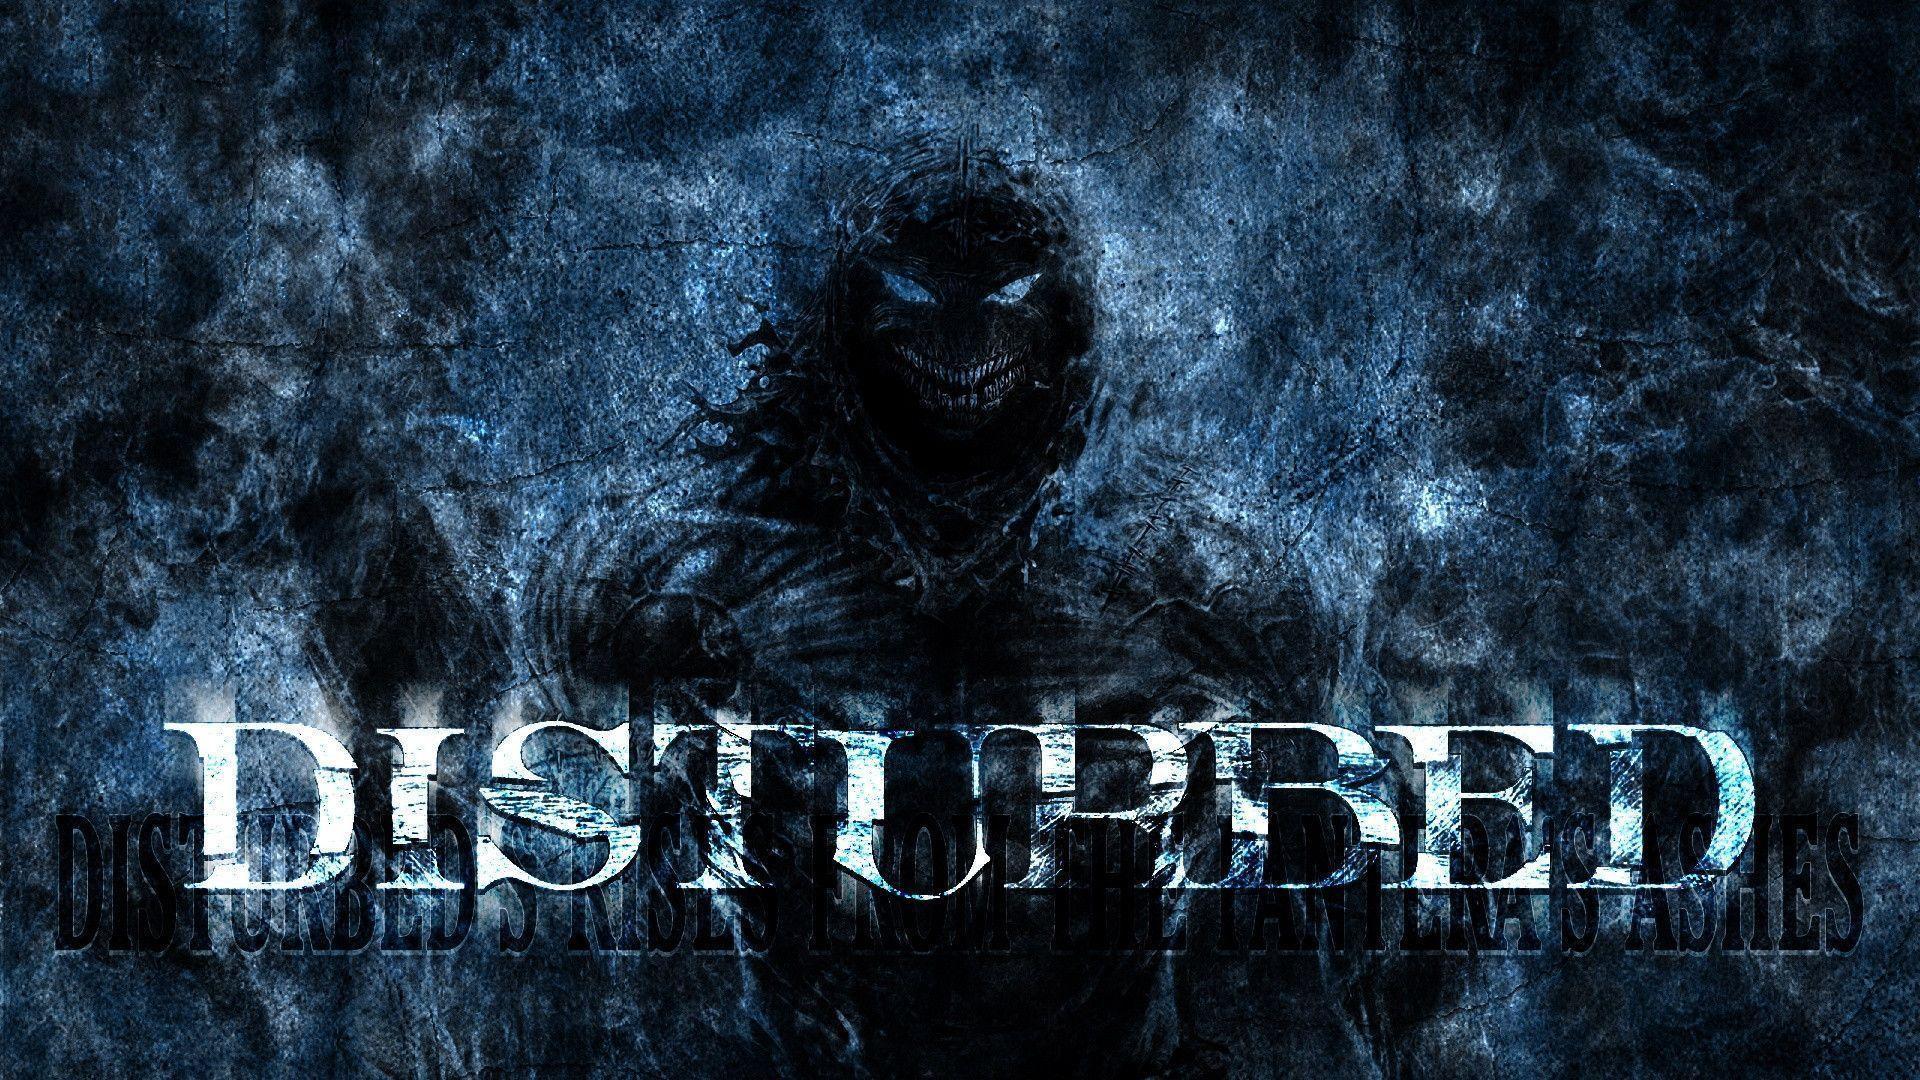 image For > Disturbed The Lost Children Wallpaper